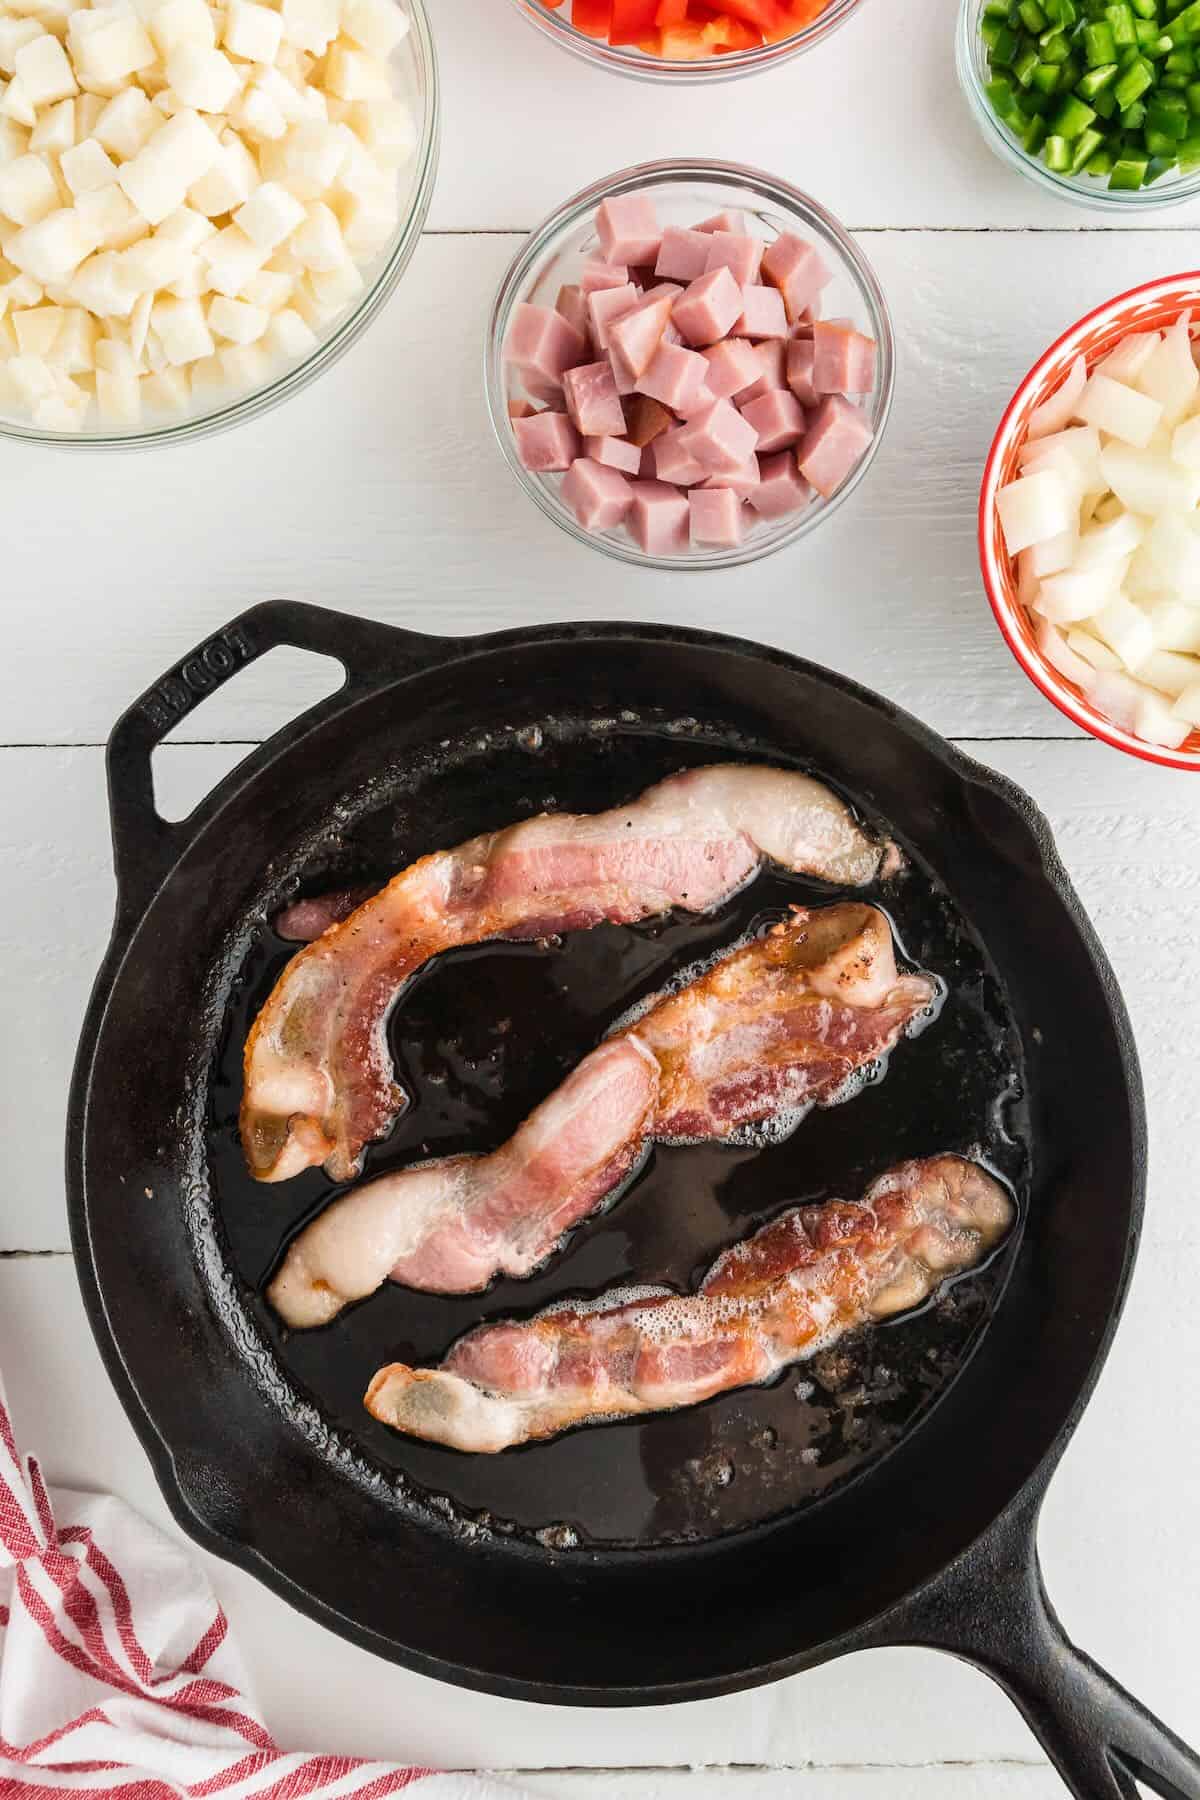 Three slices of bacon cooking in a cast iron skillet.